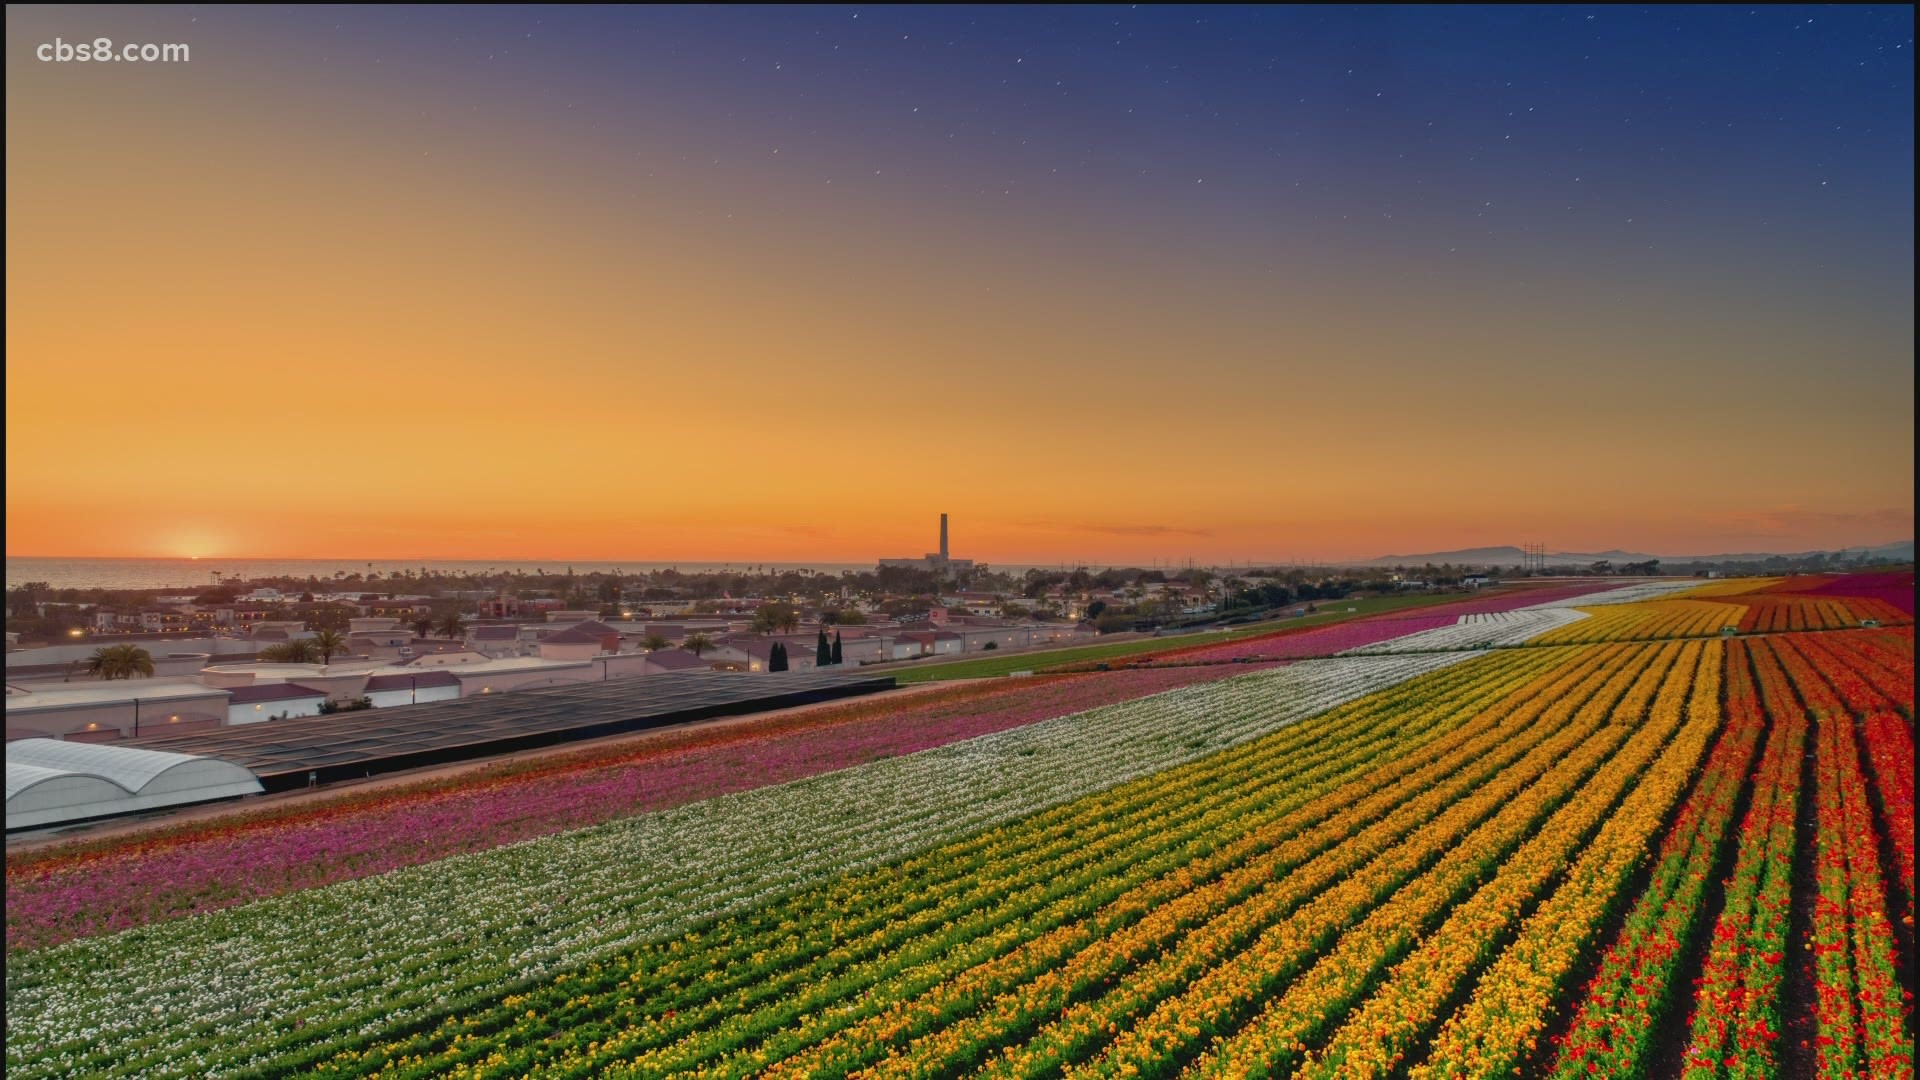 The nearly 50-acres of flower fields have been in North San Diego for more than 60-years and typically bloom for 6-8 weeks from early March to early May.